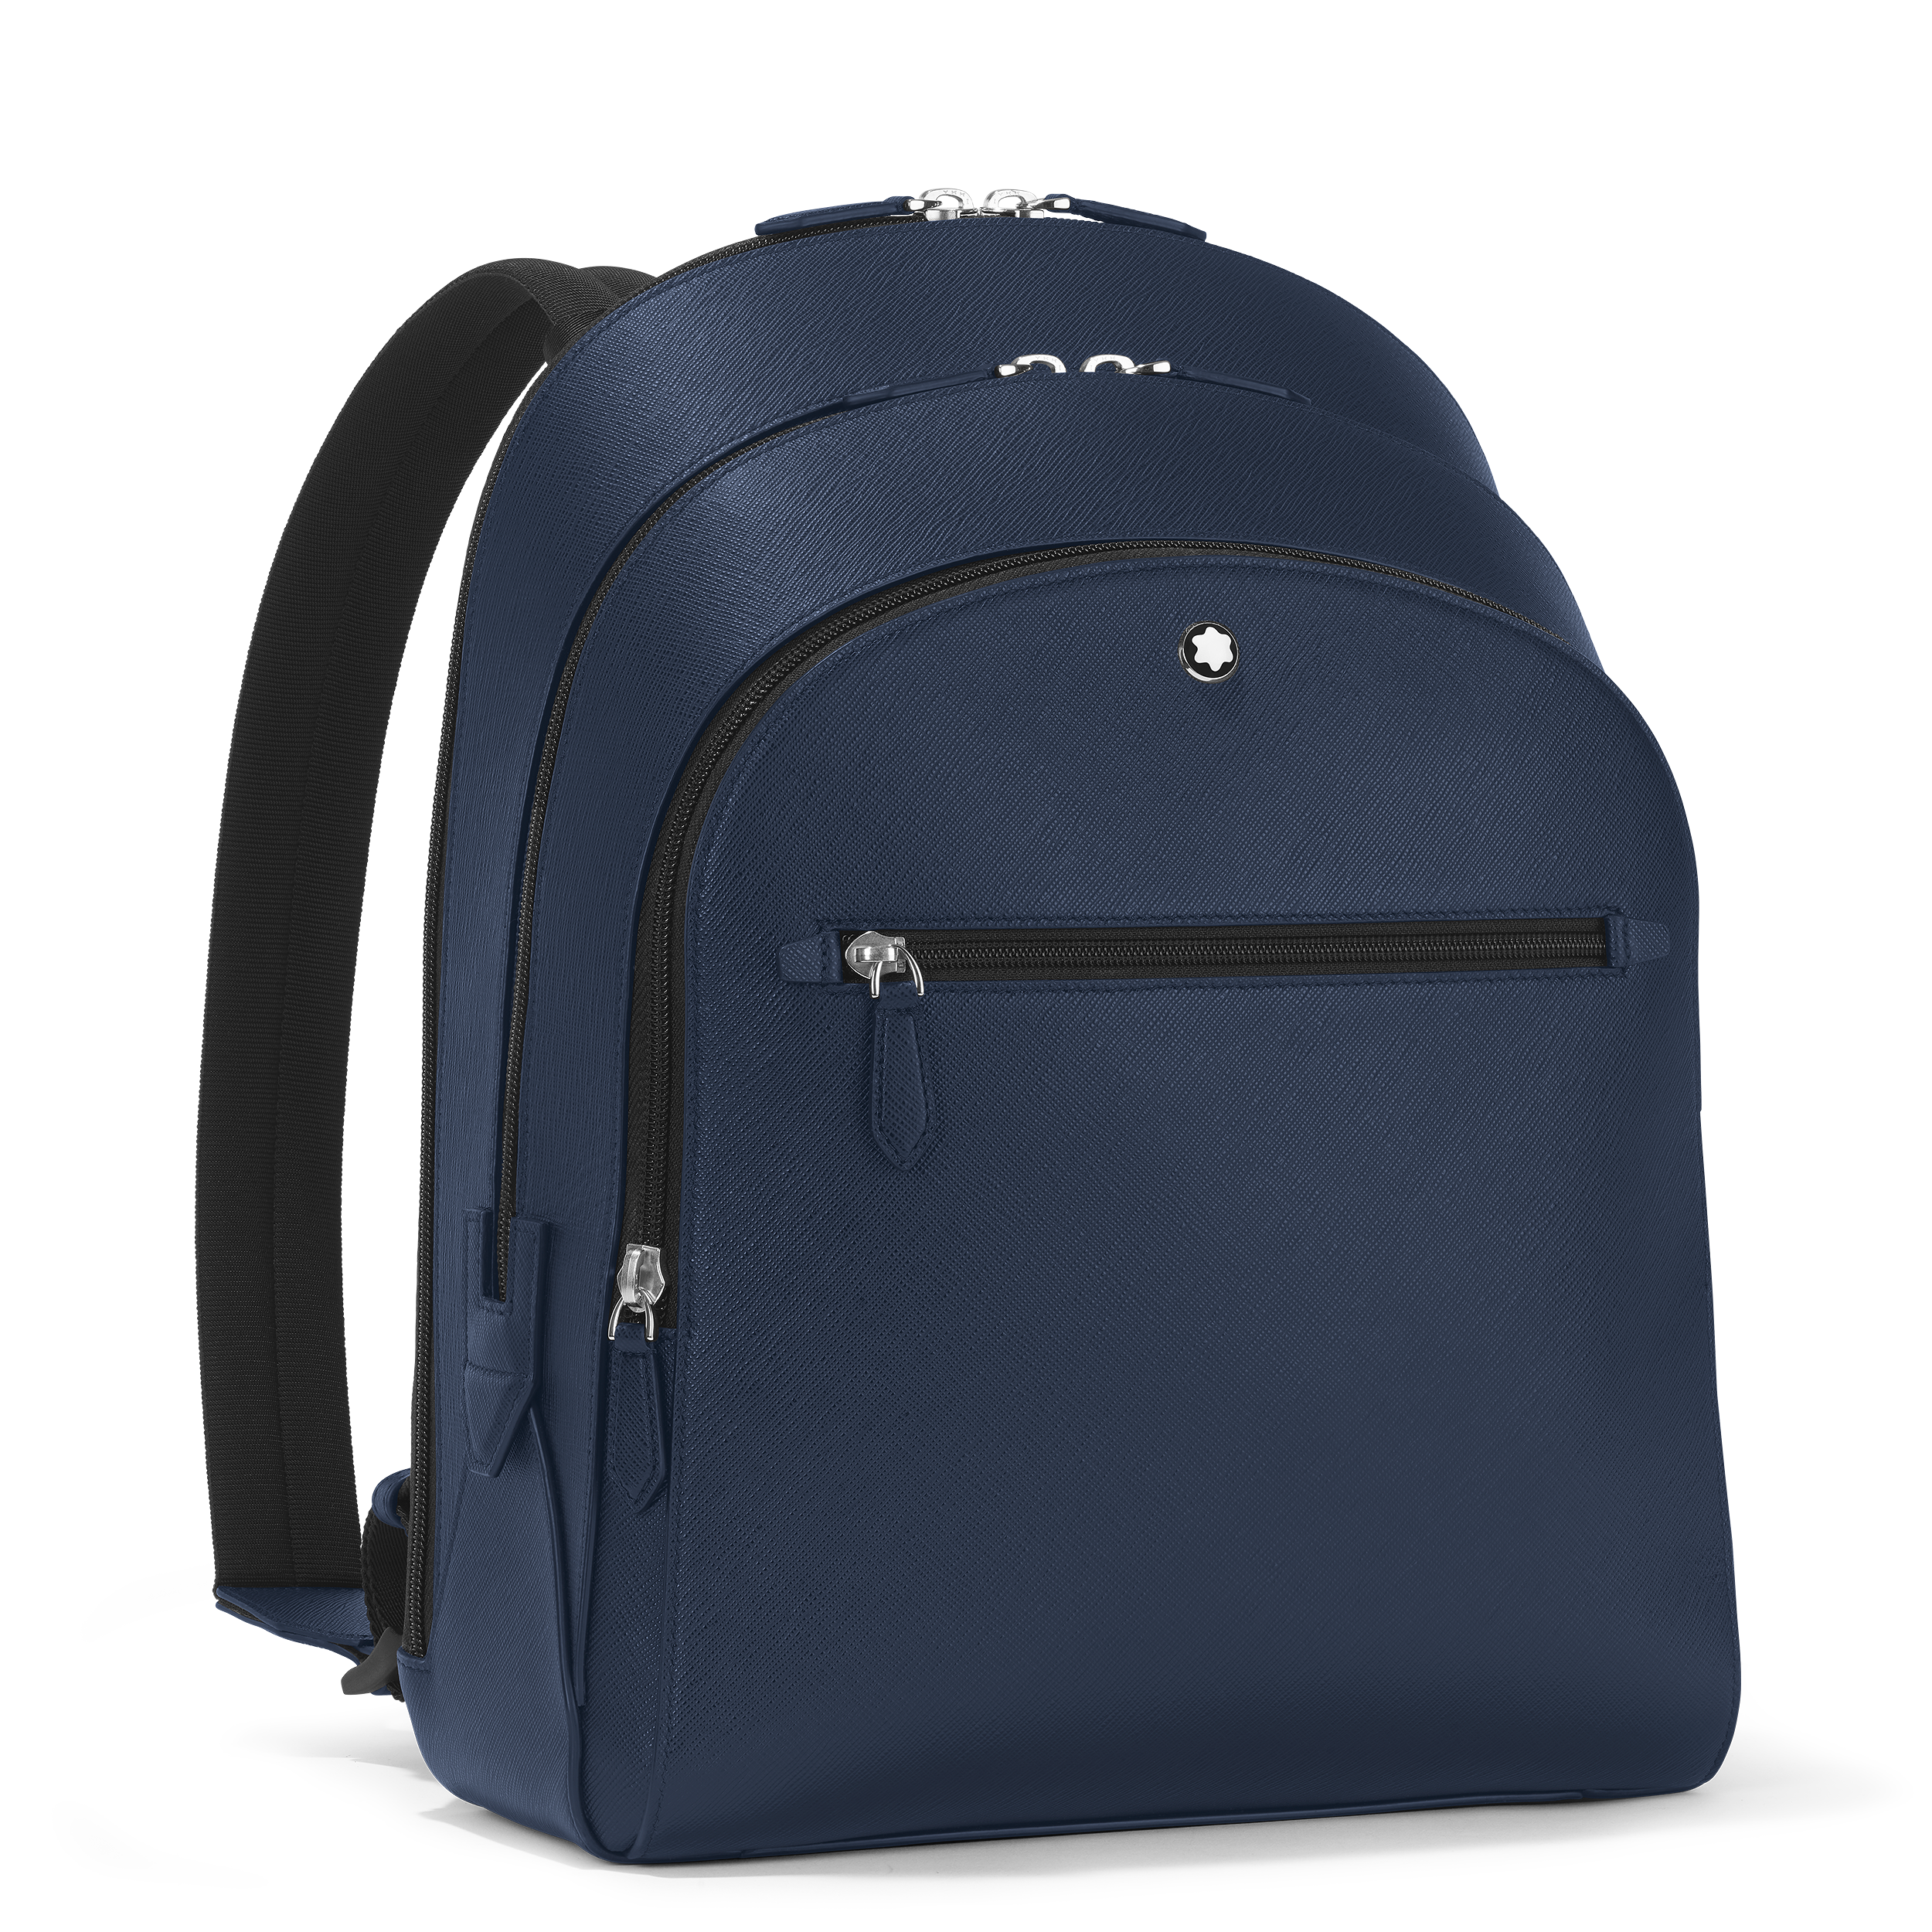 Montblanc Sartorial medium backpack 3 compartments, image 3